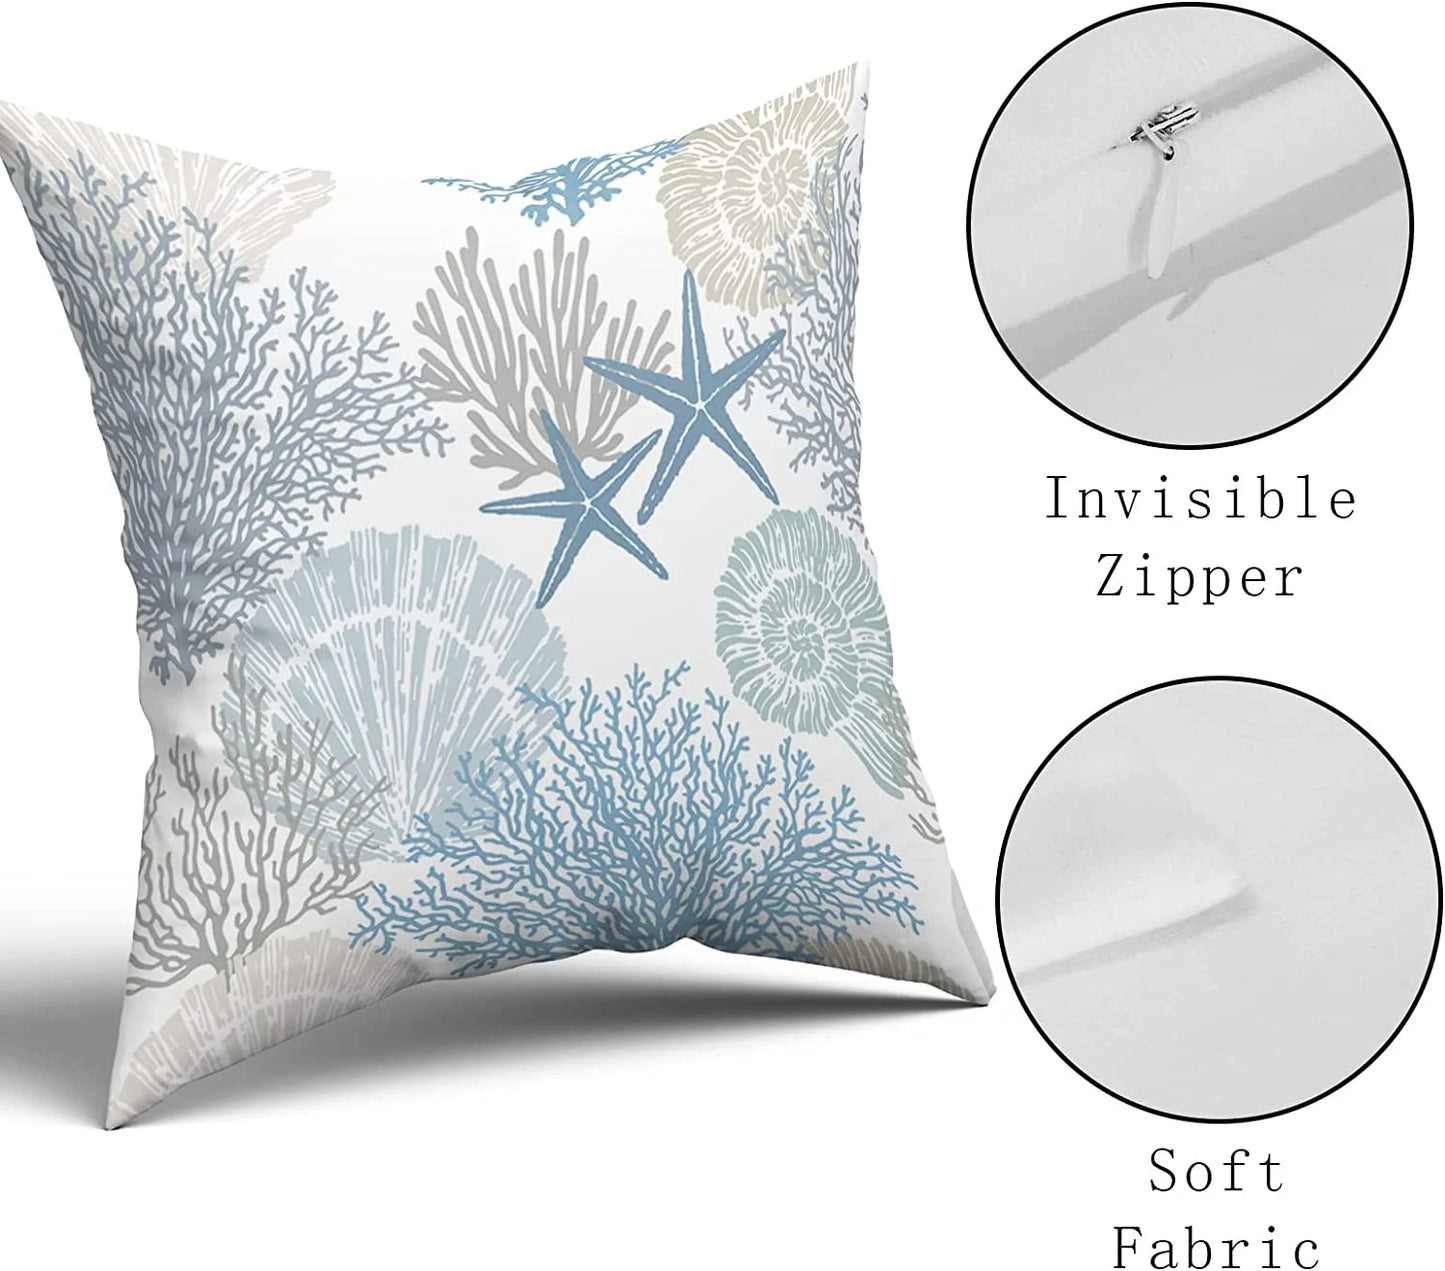 Aytipun Nautical Coastal Throw Pillow Covers 18x18 Inch Summer Ocean Themed Seashell Coral Starfish Pillow Cases Set of 2 Soft Cotton Square Cushion Covers for Home Couch Sofa Patio Bedroom